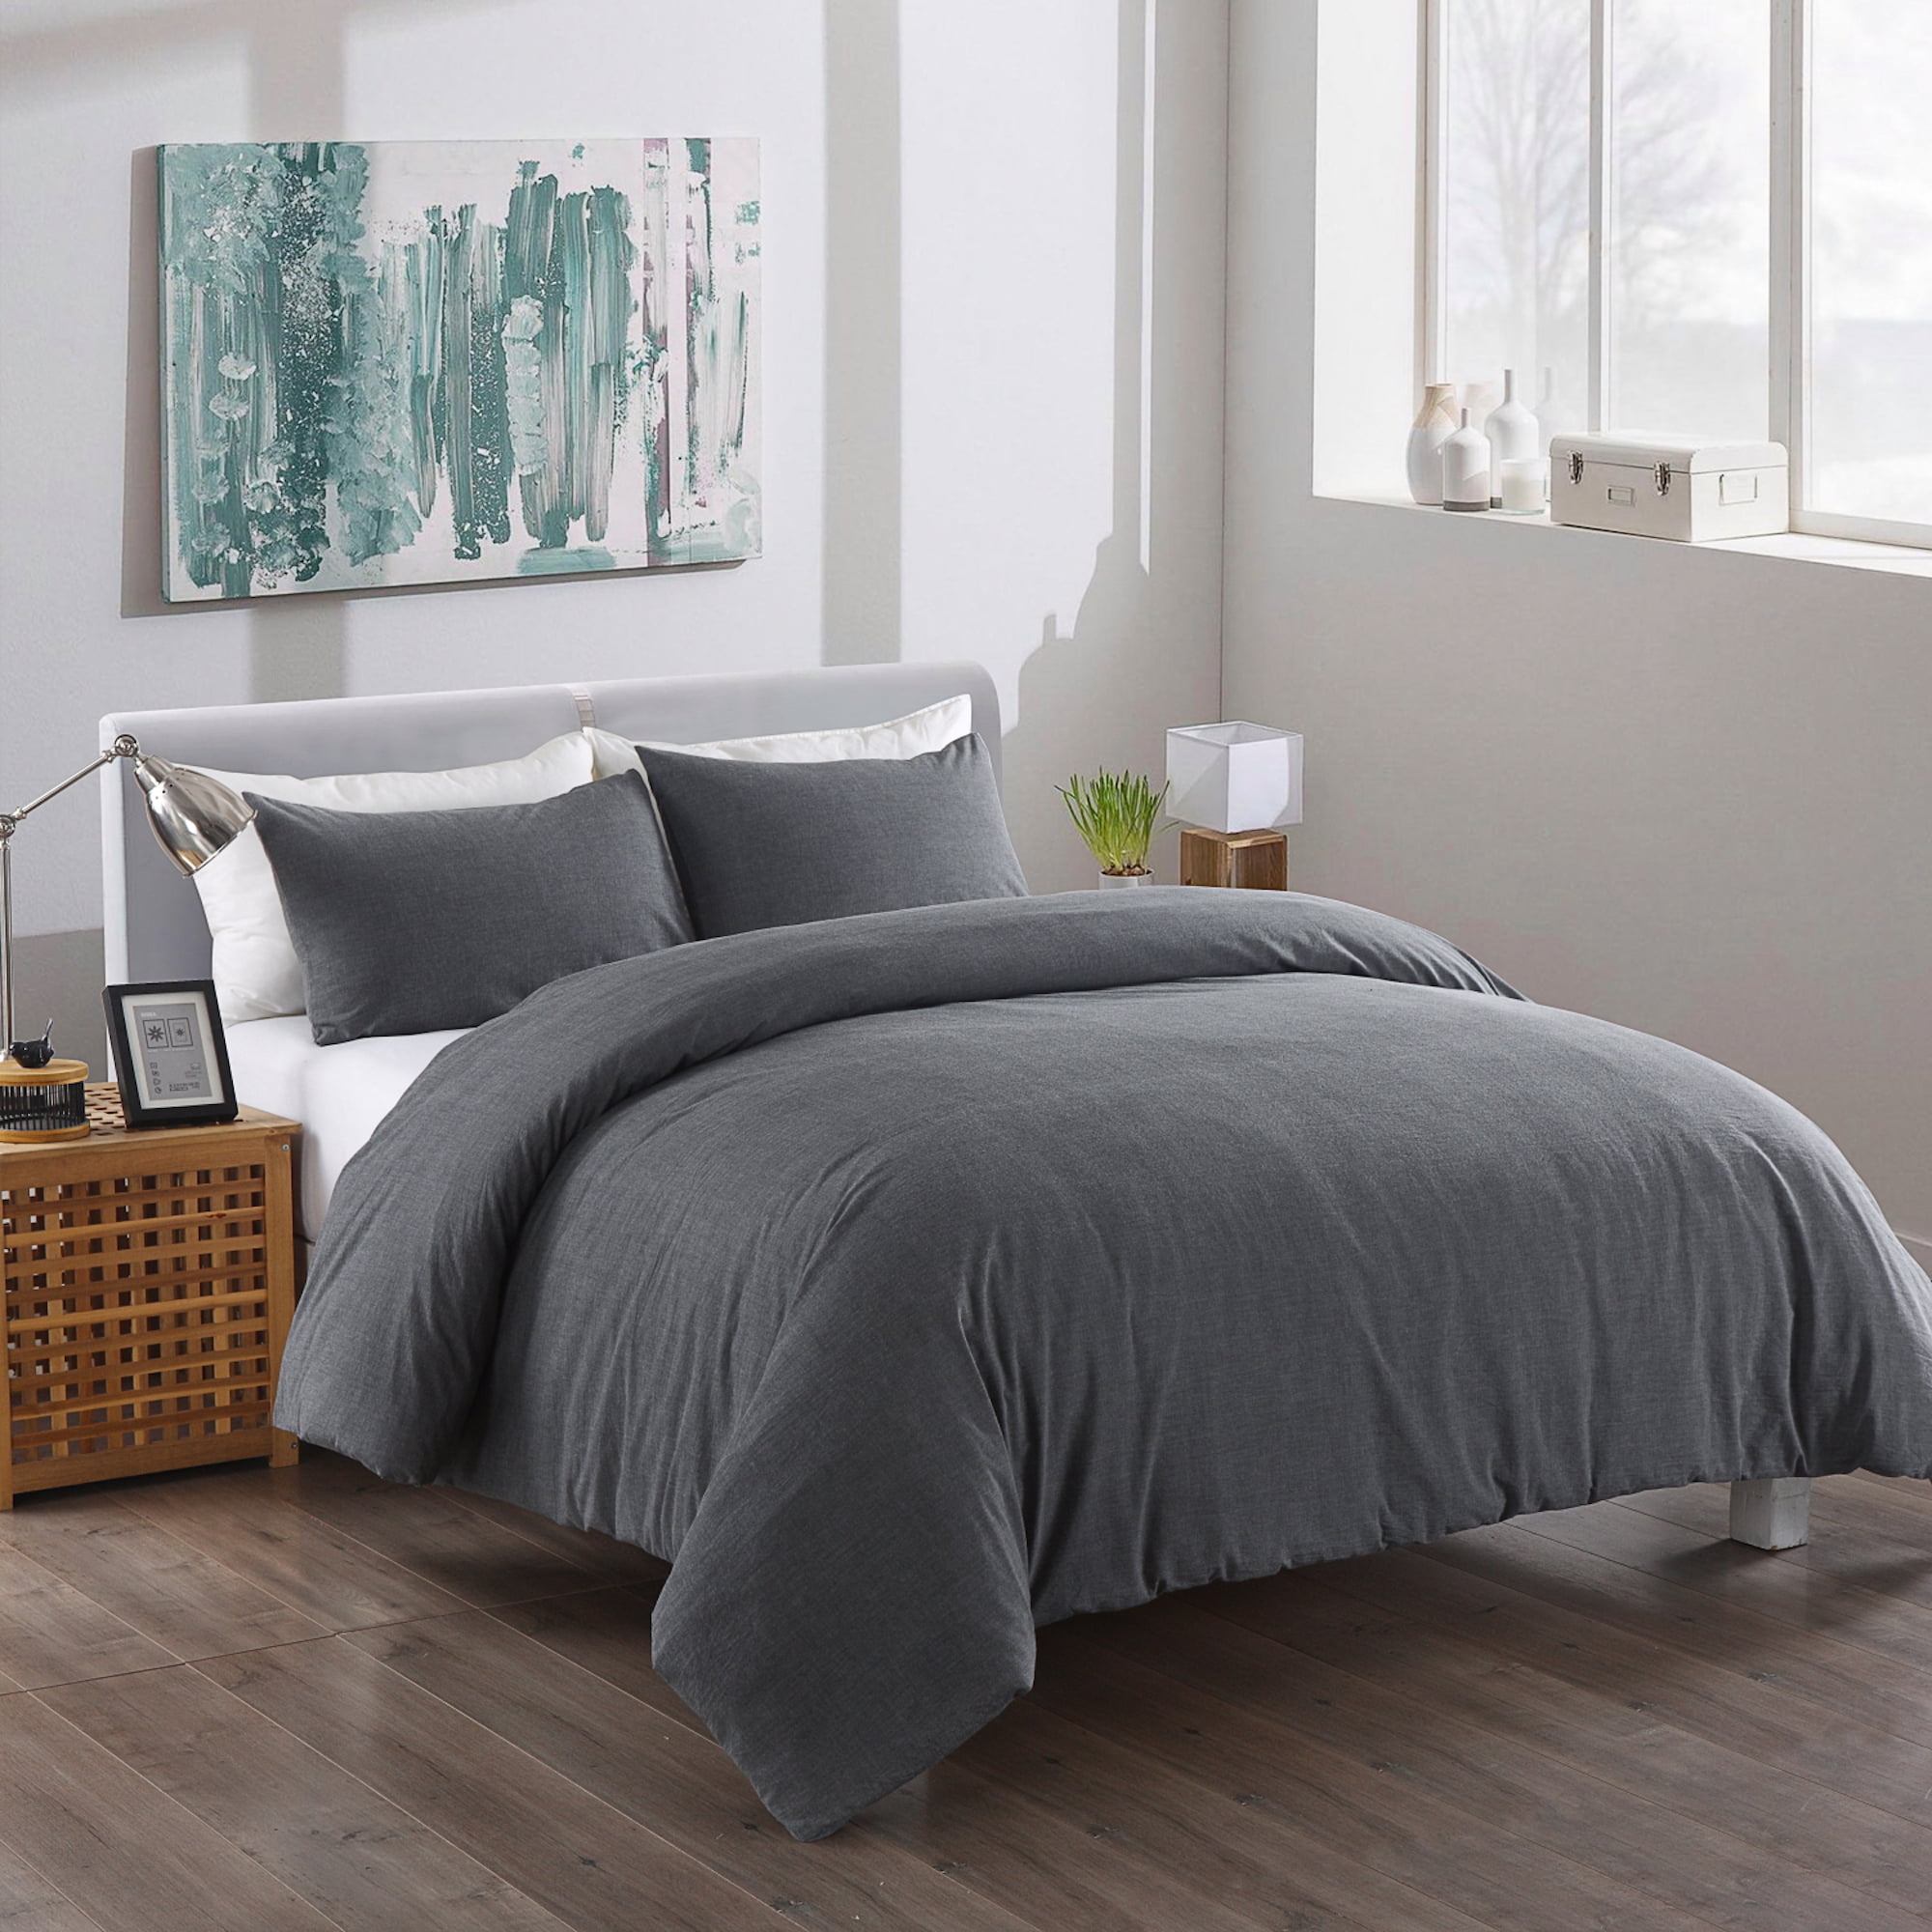 Messy Bed Washed Cotton Duvet Cover and Sham Set, Grey, Twin - Walmart.com